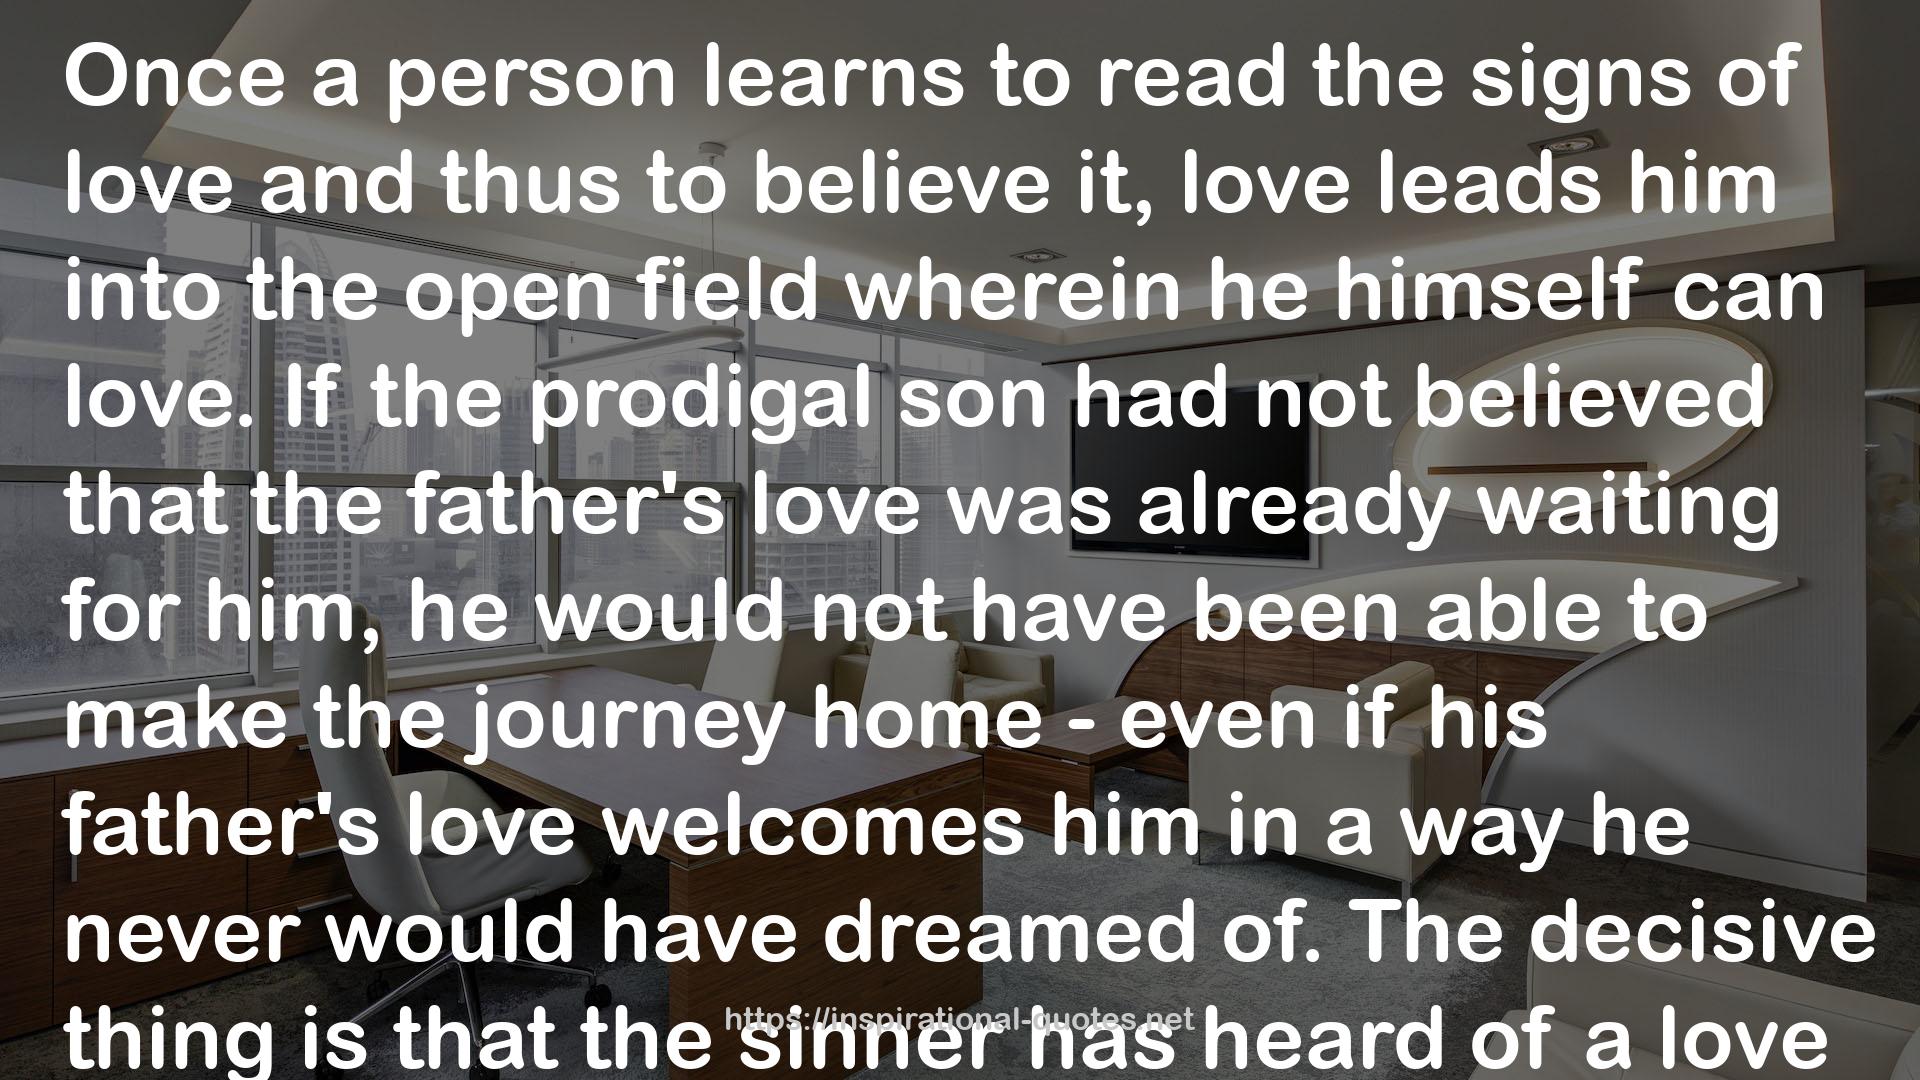 His Father's love  QUOTES